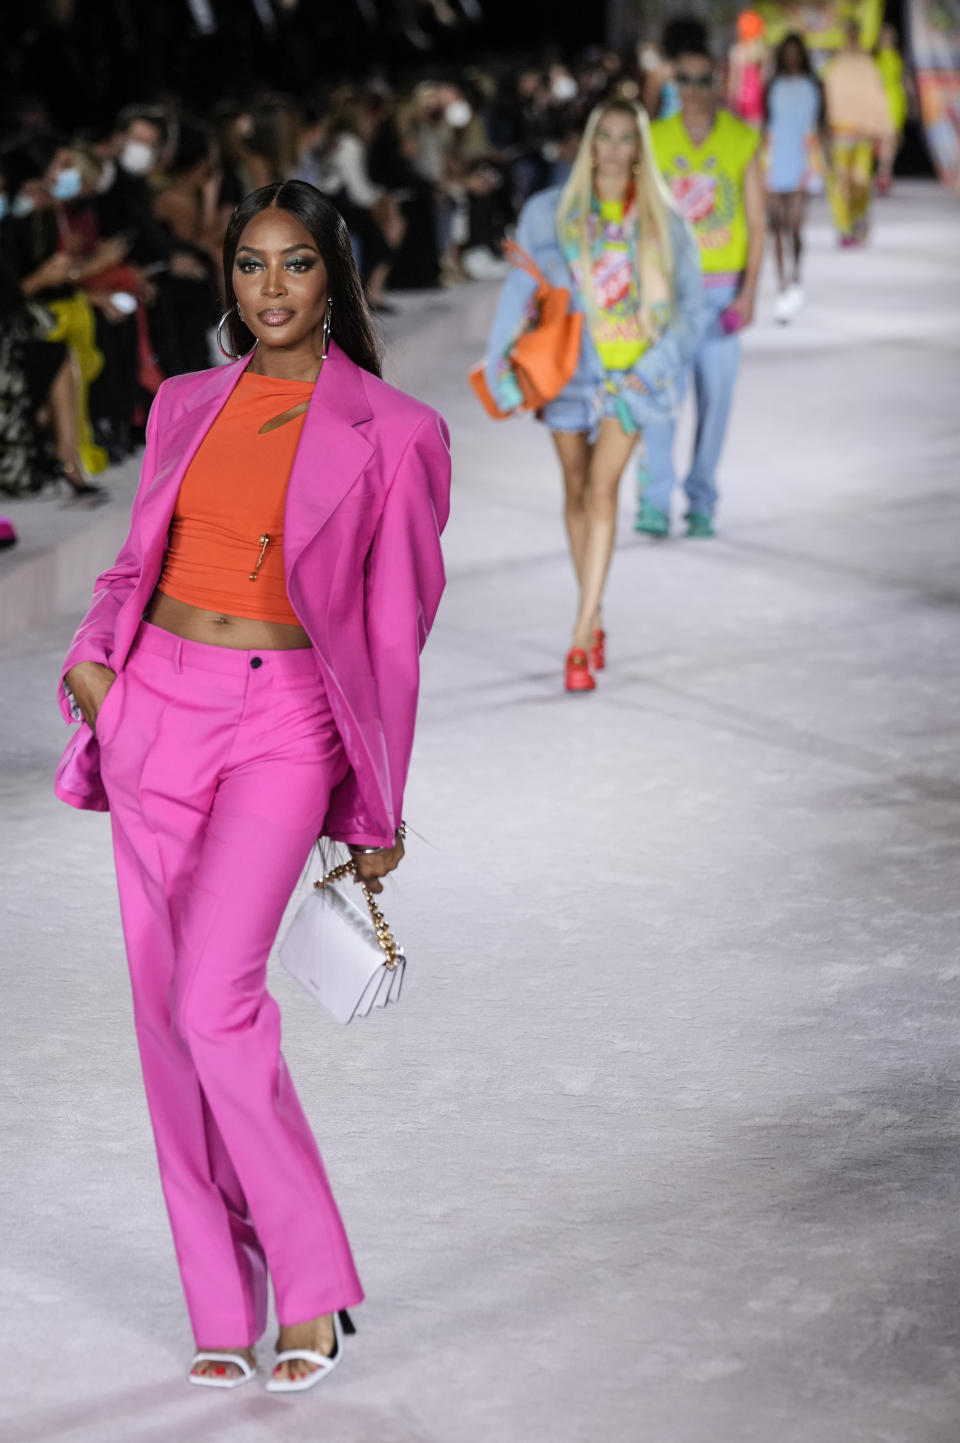 Naomi Campbell wears a creation for the Versace Spring Summer 2022 collection during Milan Fashion Week, in Milan, Italy, Friday, Sept. 24, 2021. (AP Photo/Luca Bruno)